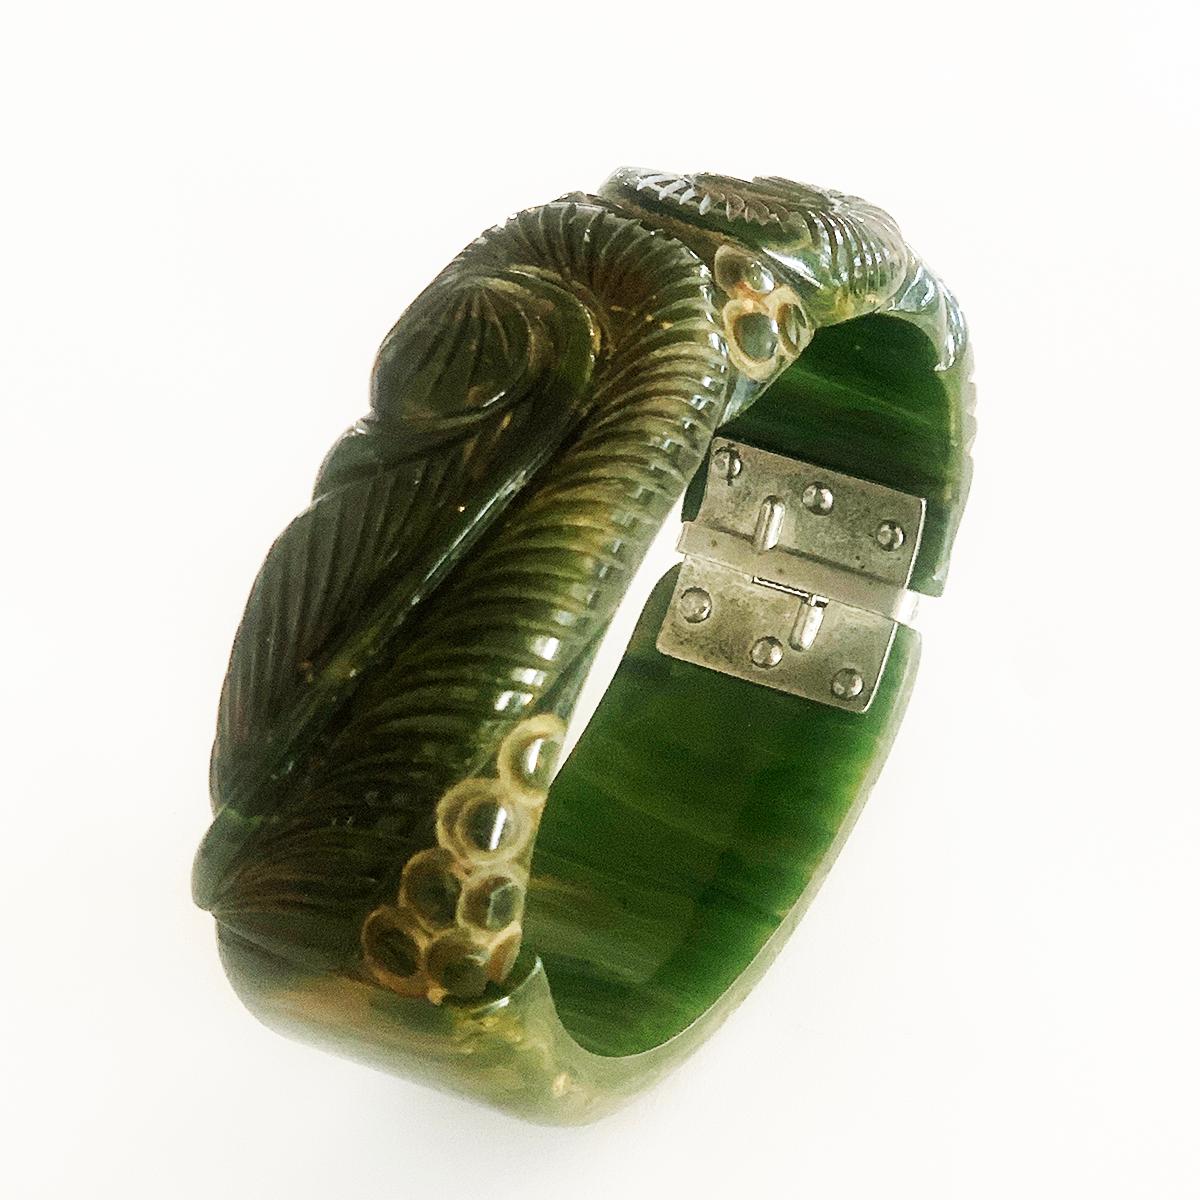 Art Deco heavily carved jade green marbled bakelite clamper hinged bracelet In Good Condition For Sale In Daylesford, Victoria